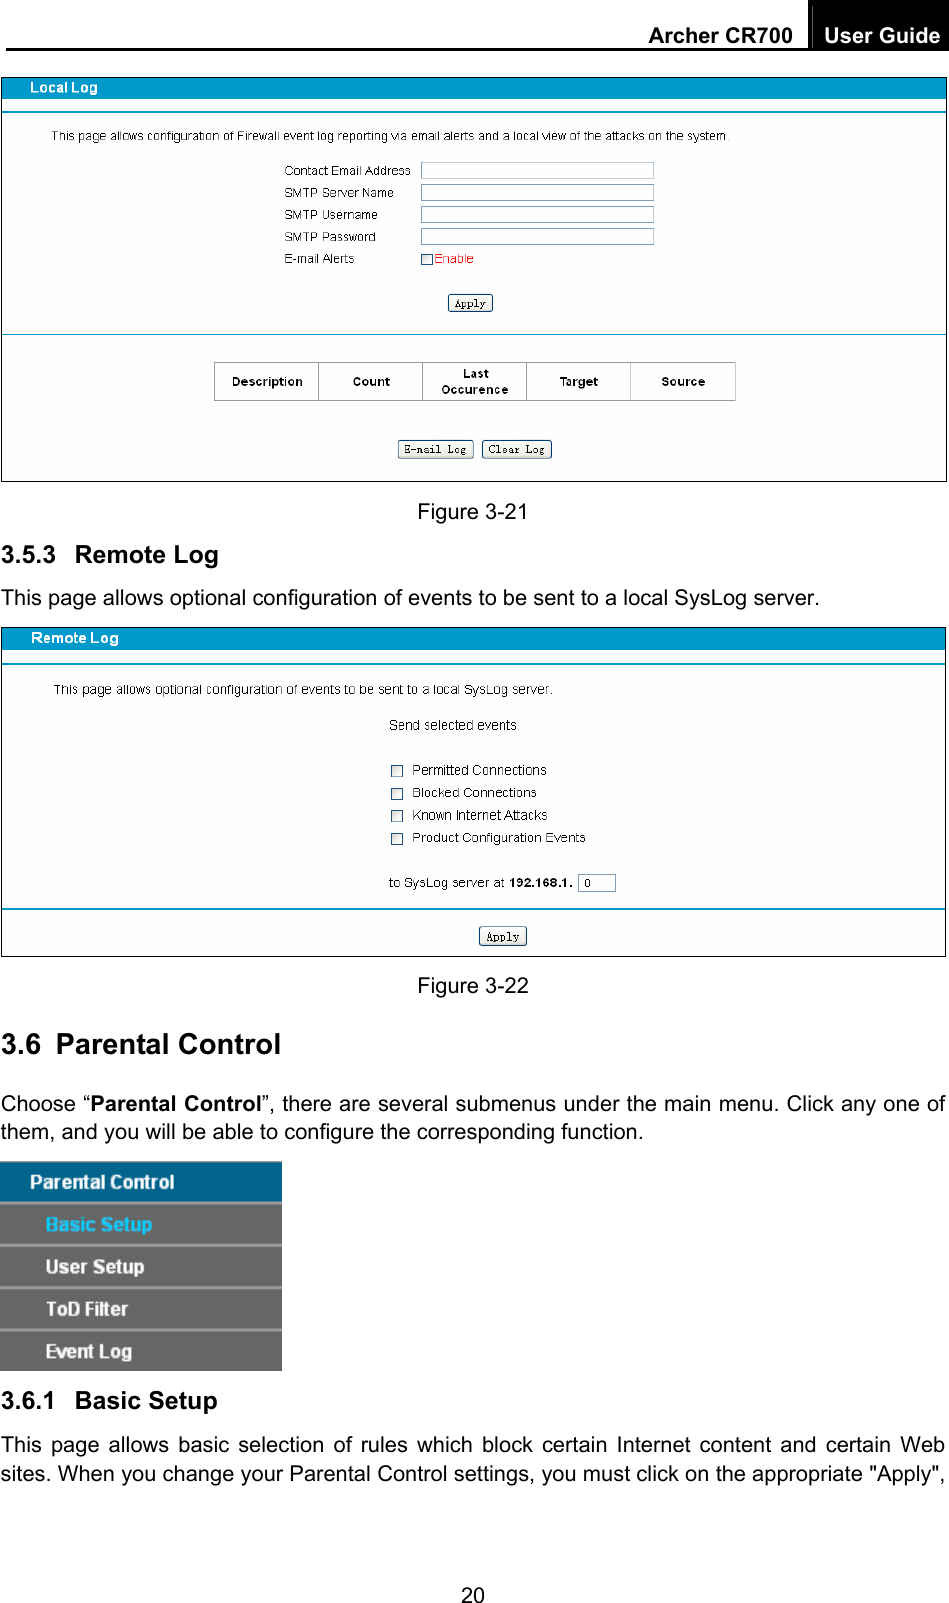 Archer CR700  User Guide 20  Figure 3-21   3.5.3  Remote Log This page allows optional configuration of events to be sent to a local SysLog server.  Figure 3-22   3.6  Parental Control Choose “Parental Control”, there are several submenus under the main menu. Click any one of them, and you will be able to configure the corresponding function.    3.6.1  Basic Setup This page allows basic selection of rules which block certain Internet content and certain Web sites. When you change your Parental Control settings, you must click on the appropriate &quot;Apply&quot;, 